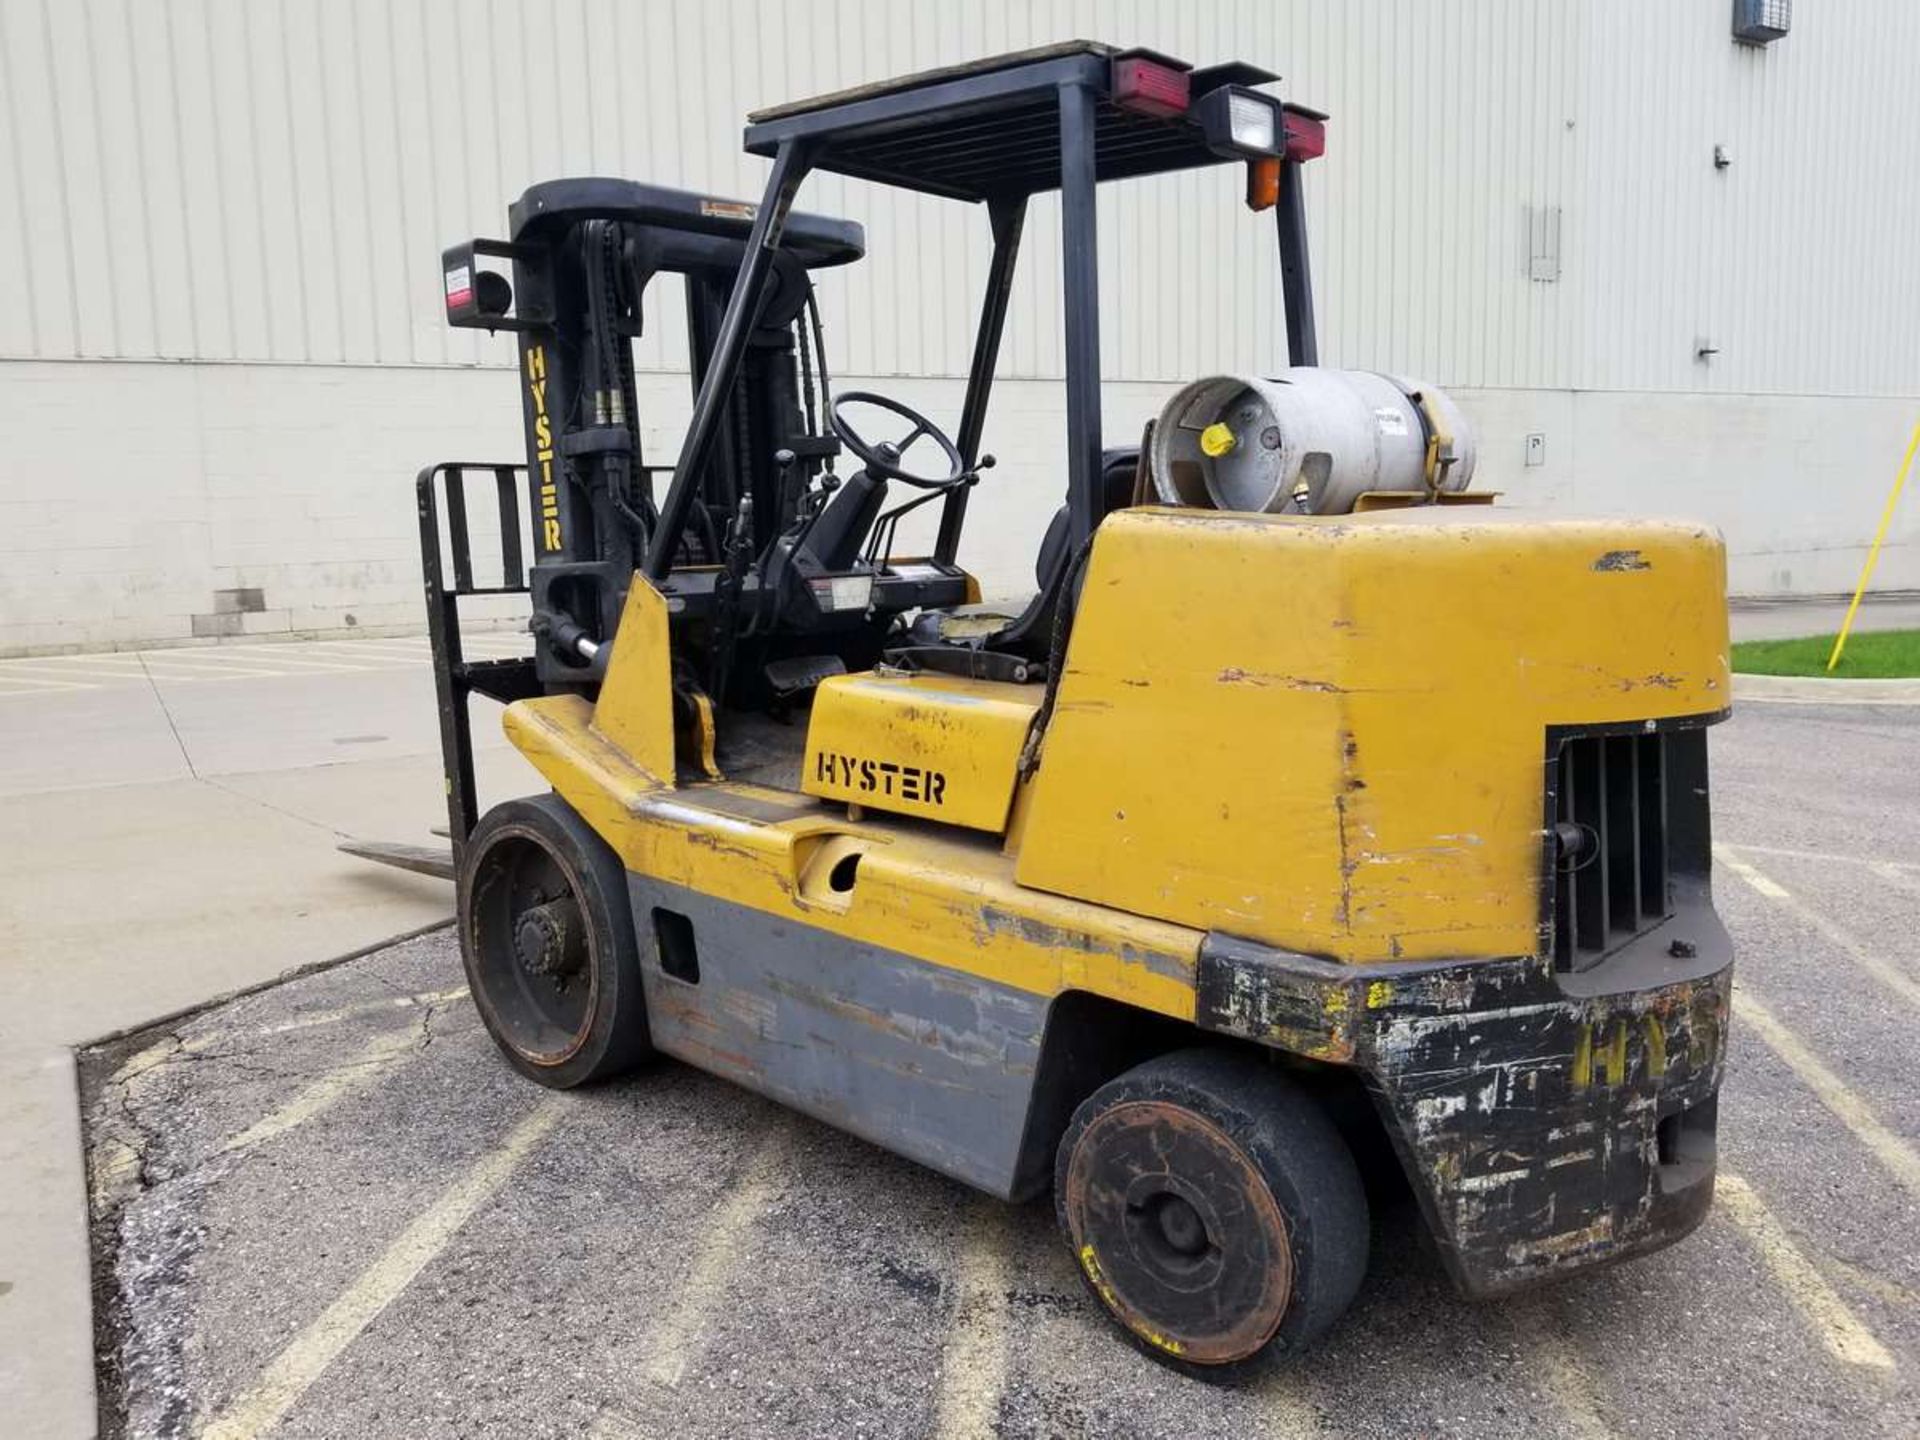 Hyster 5155XL 15,000lb LP Fork Lift - Image 2 of 10